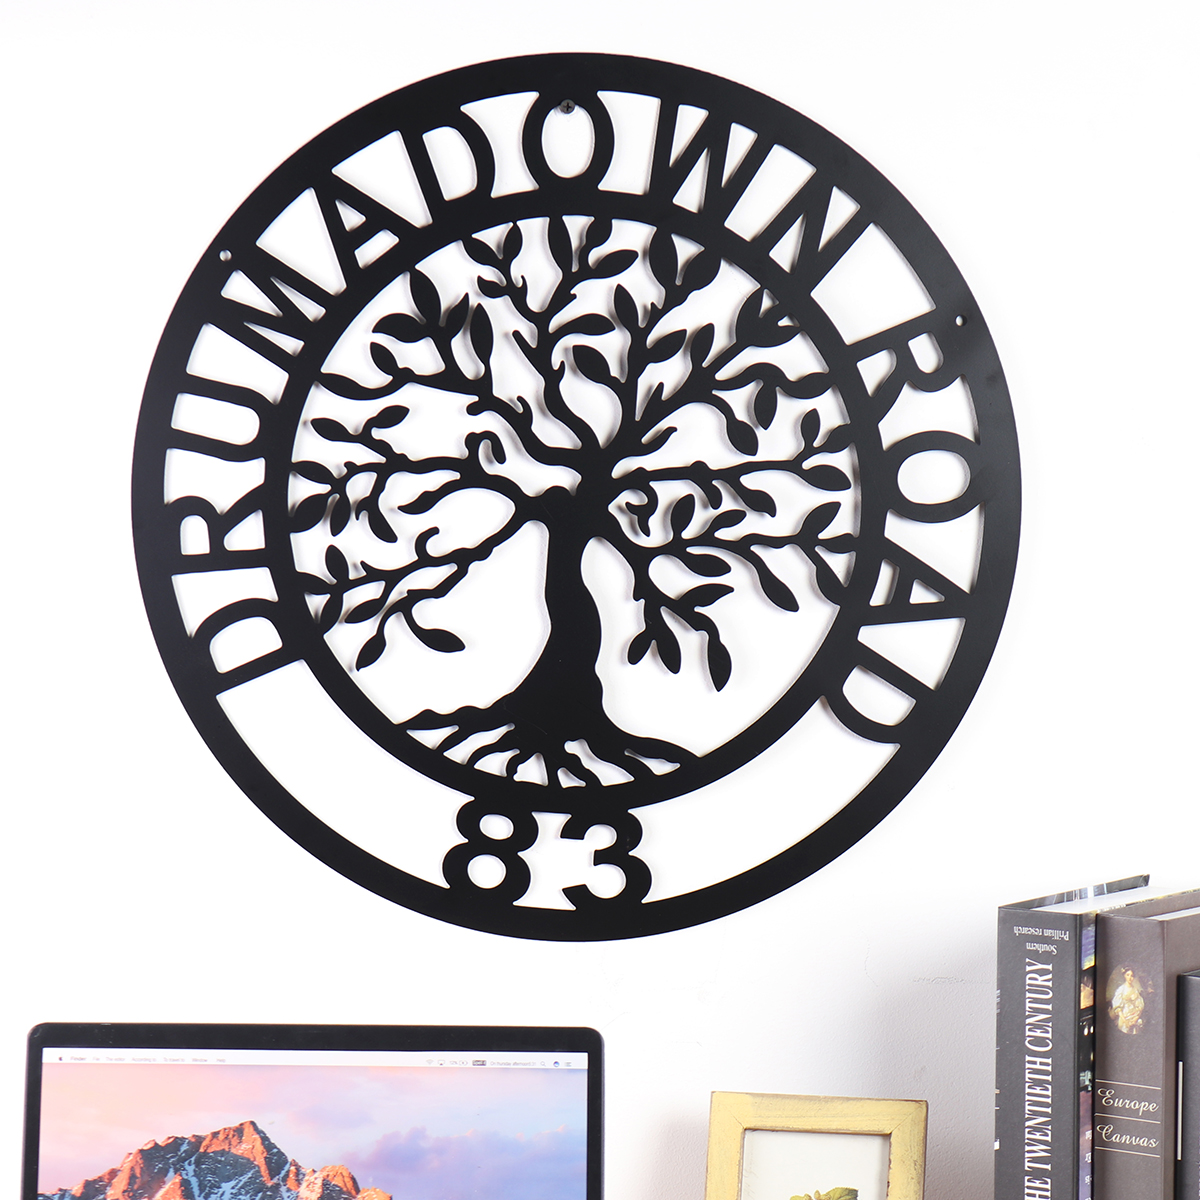 Metal-Round-Tree-of-Life-Wall-Art-Peronsalised-Wall-Decorations-for-Home-Office-Living-Room-Fashion--1764917-8